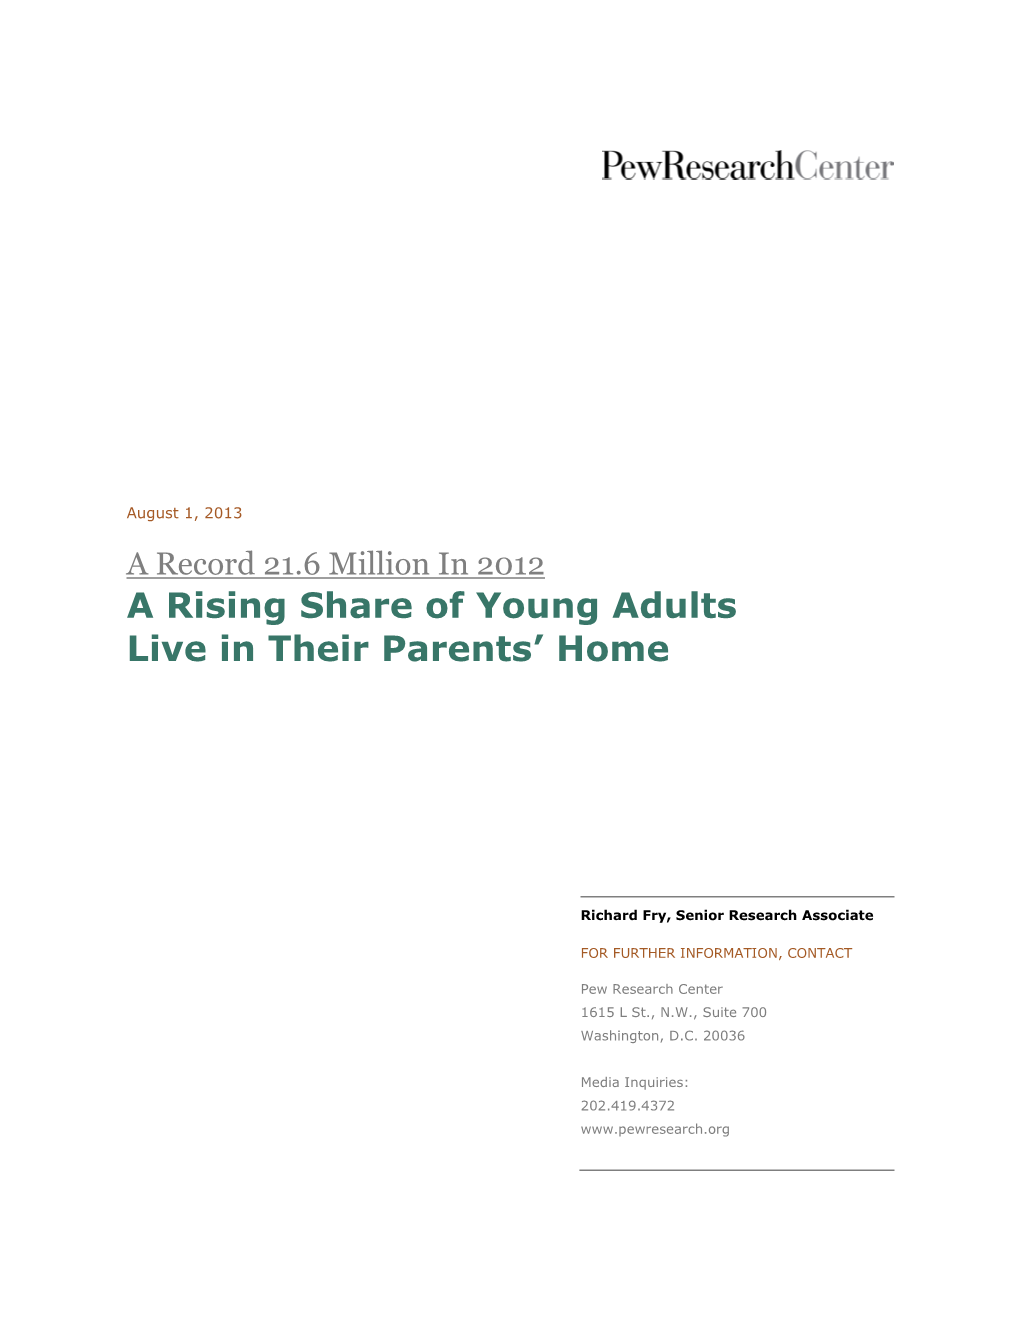 A Rising Share of Young Adults Live in Their Parents' Home